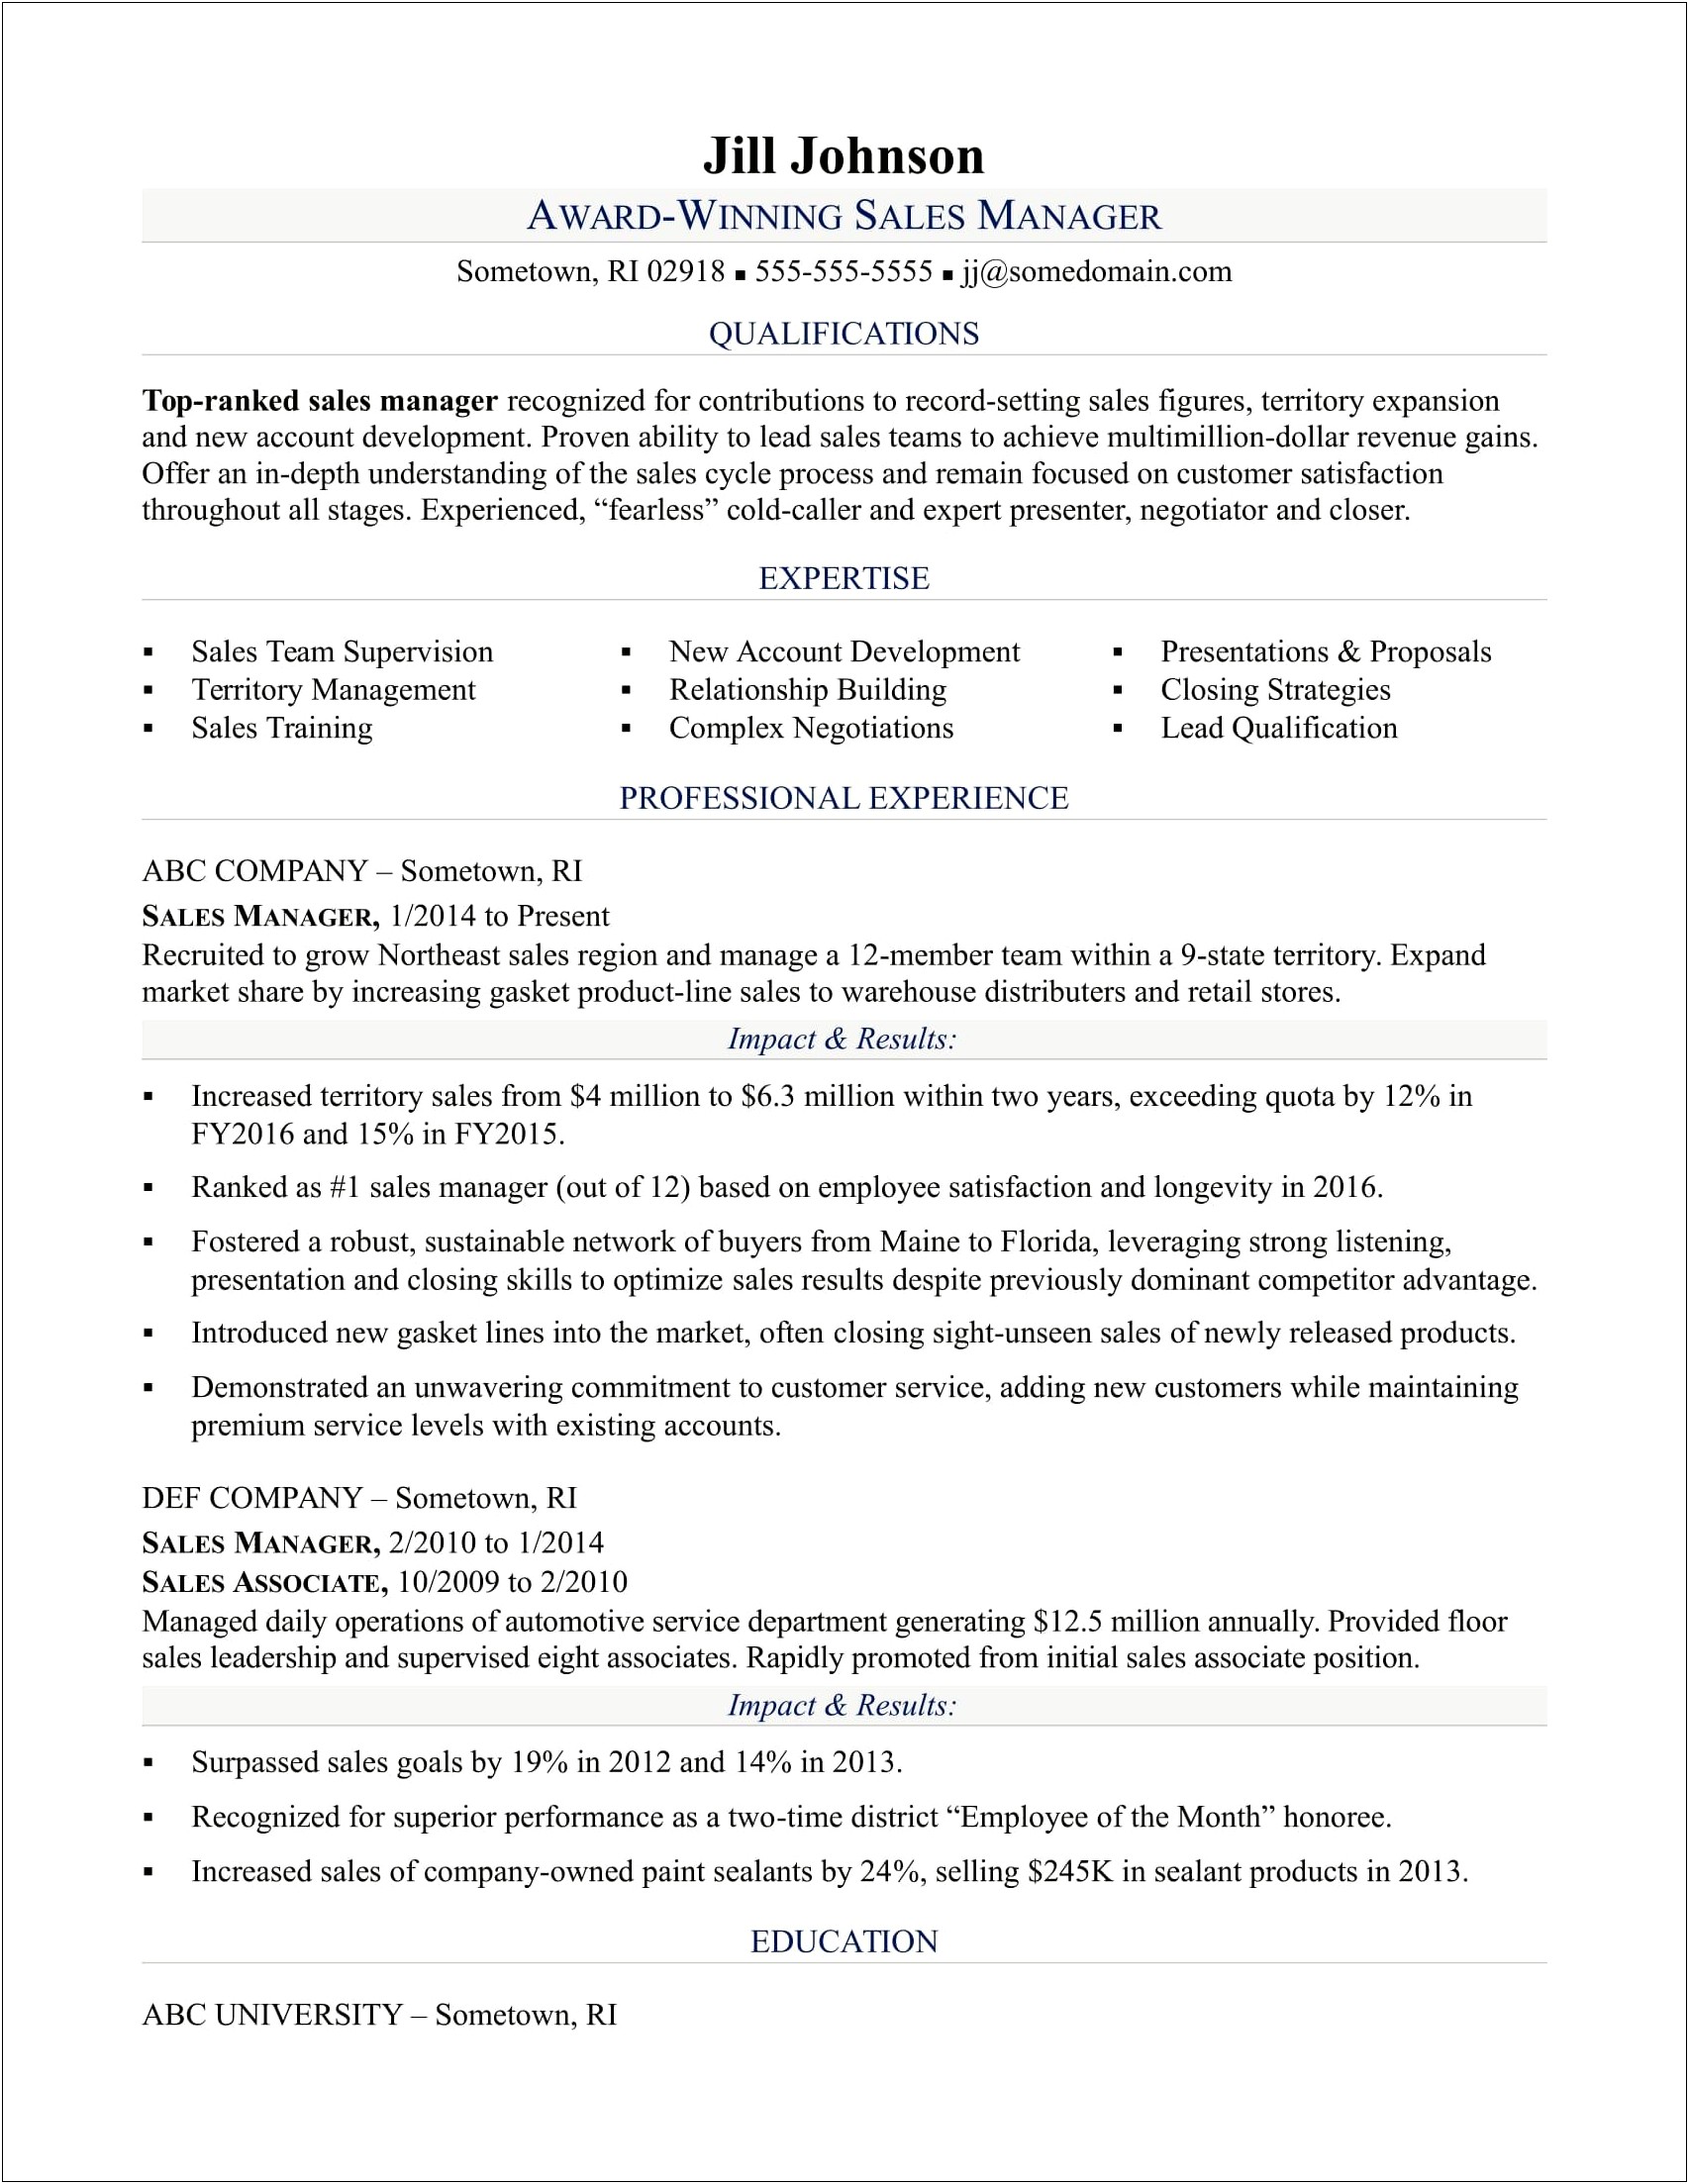 Skills And Abilities On Resume For Sales